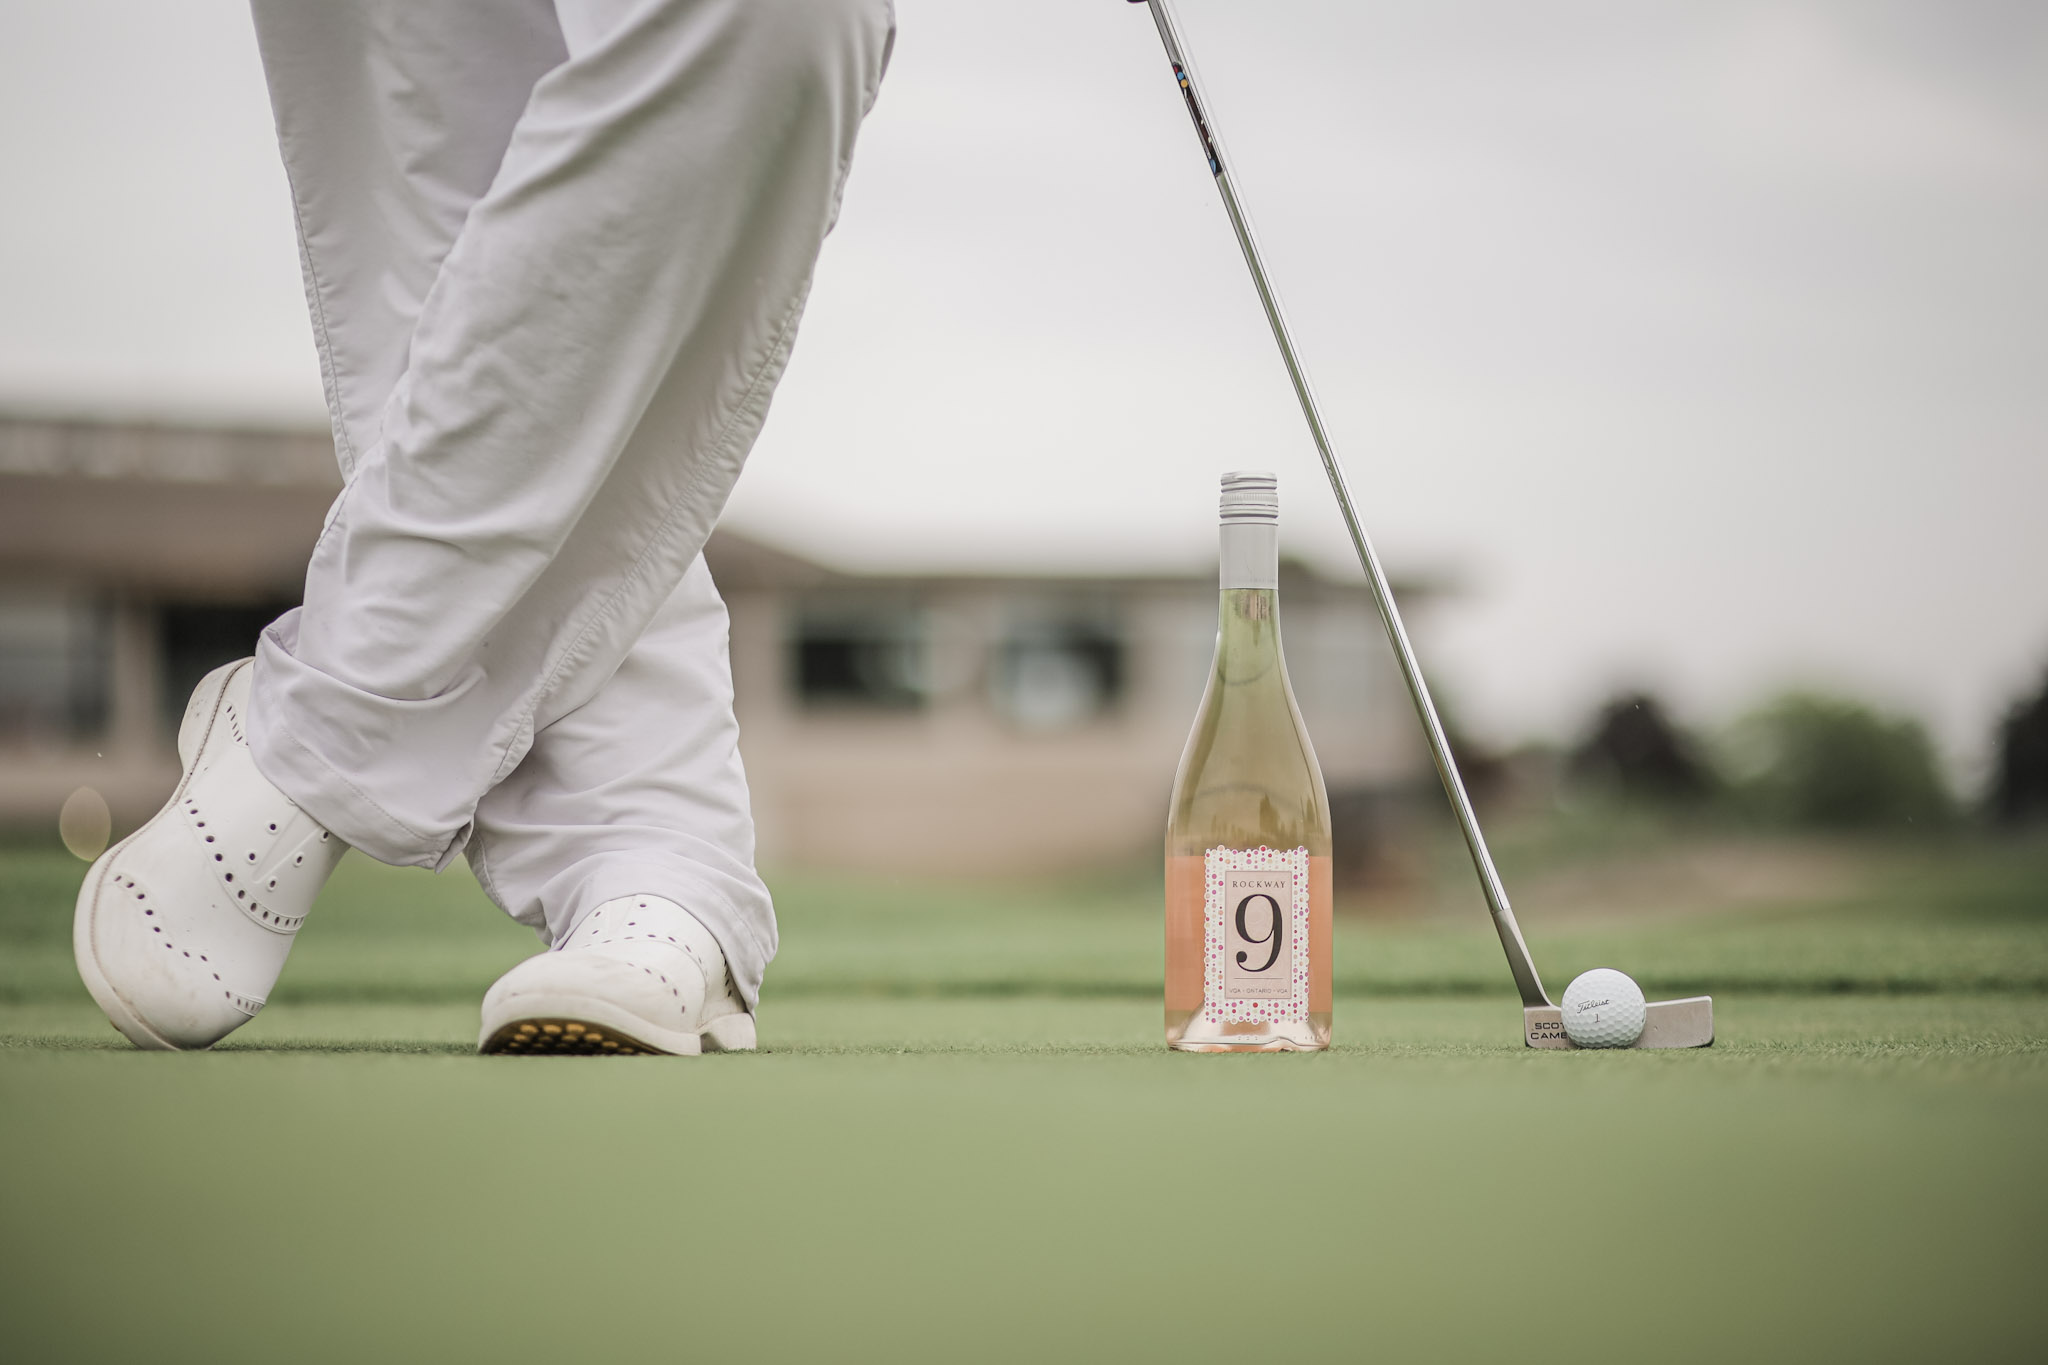 a bottle of wine on the golf course